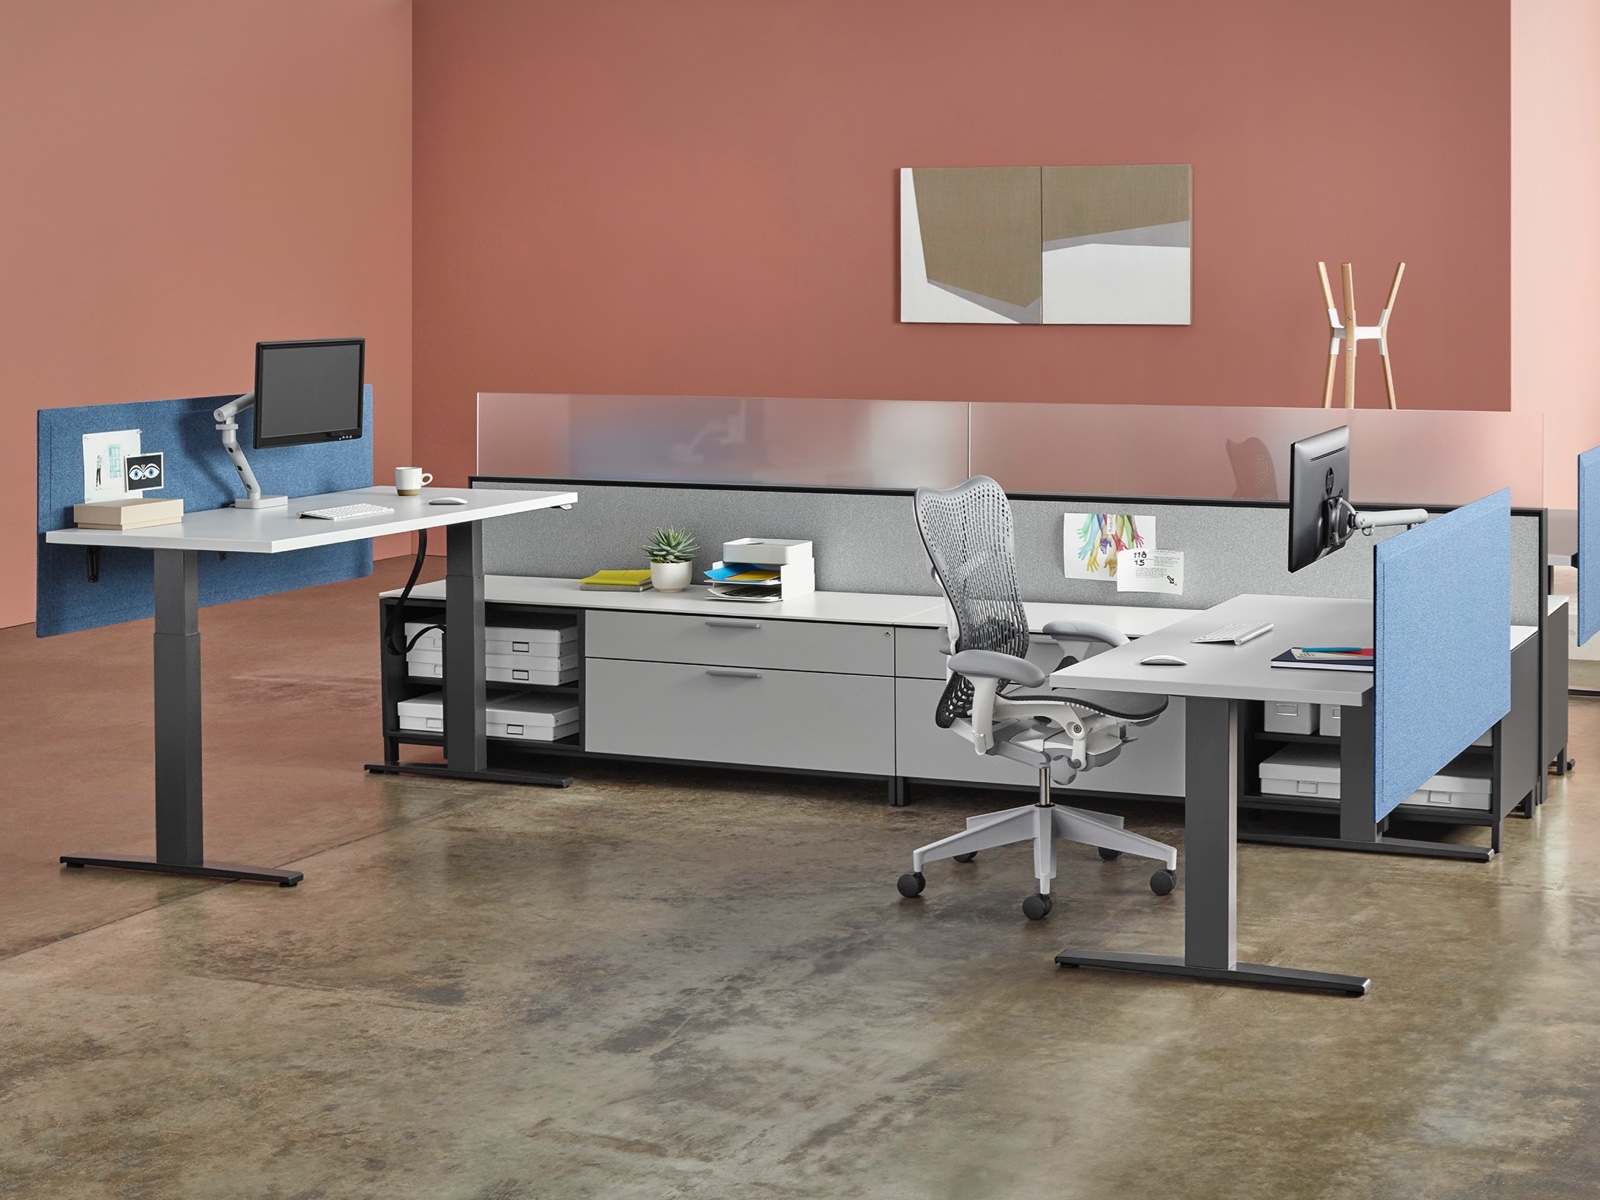 Two workpoints with Motia Sit-to-Stand Tables positioned at different heights, shared Canvas Office Landscape storage, and Plex Lounge Furniture nearby.